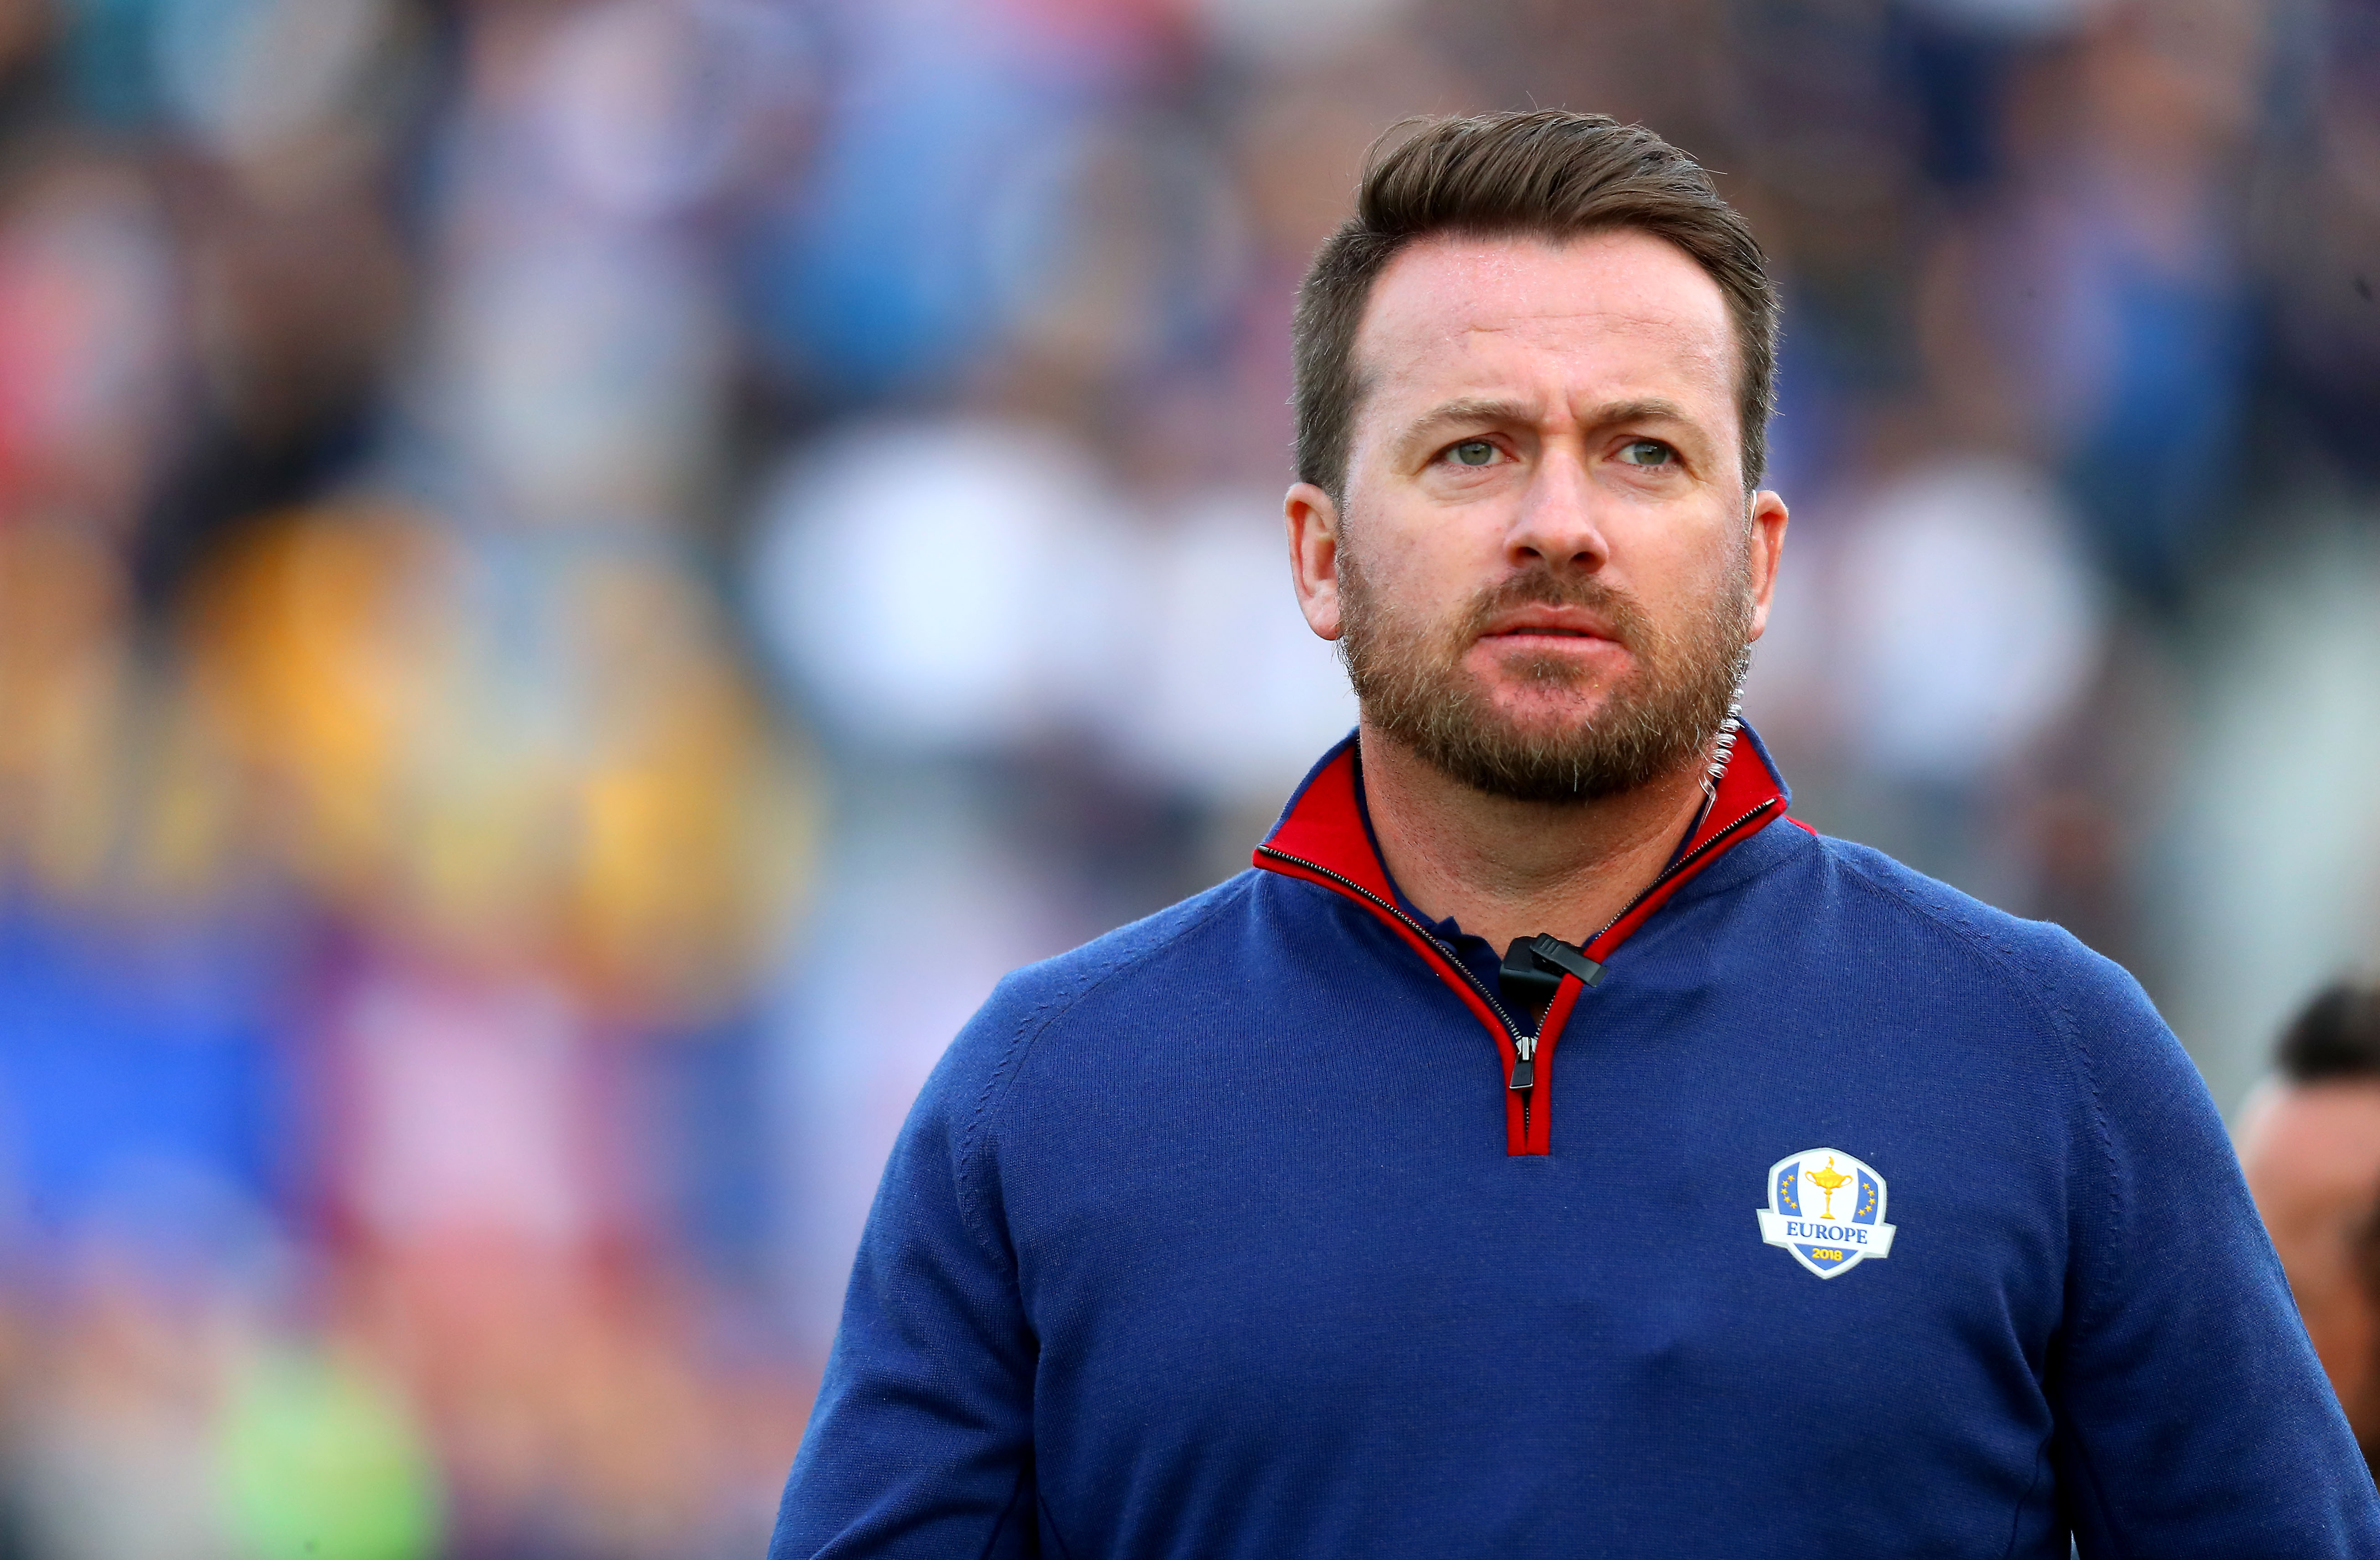 Graeme McDowell will be a valuable asset at the Ryder Cup as player or backroom man.